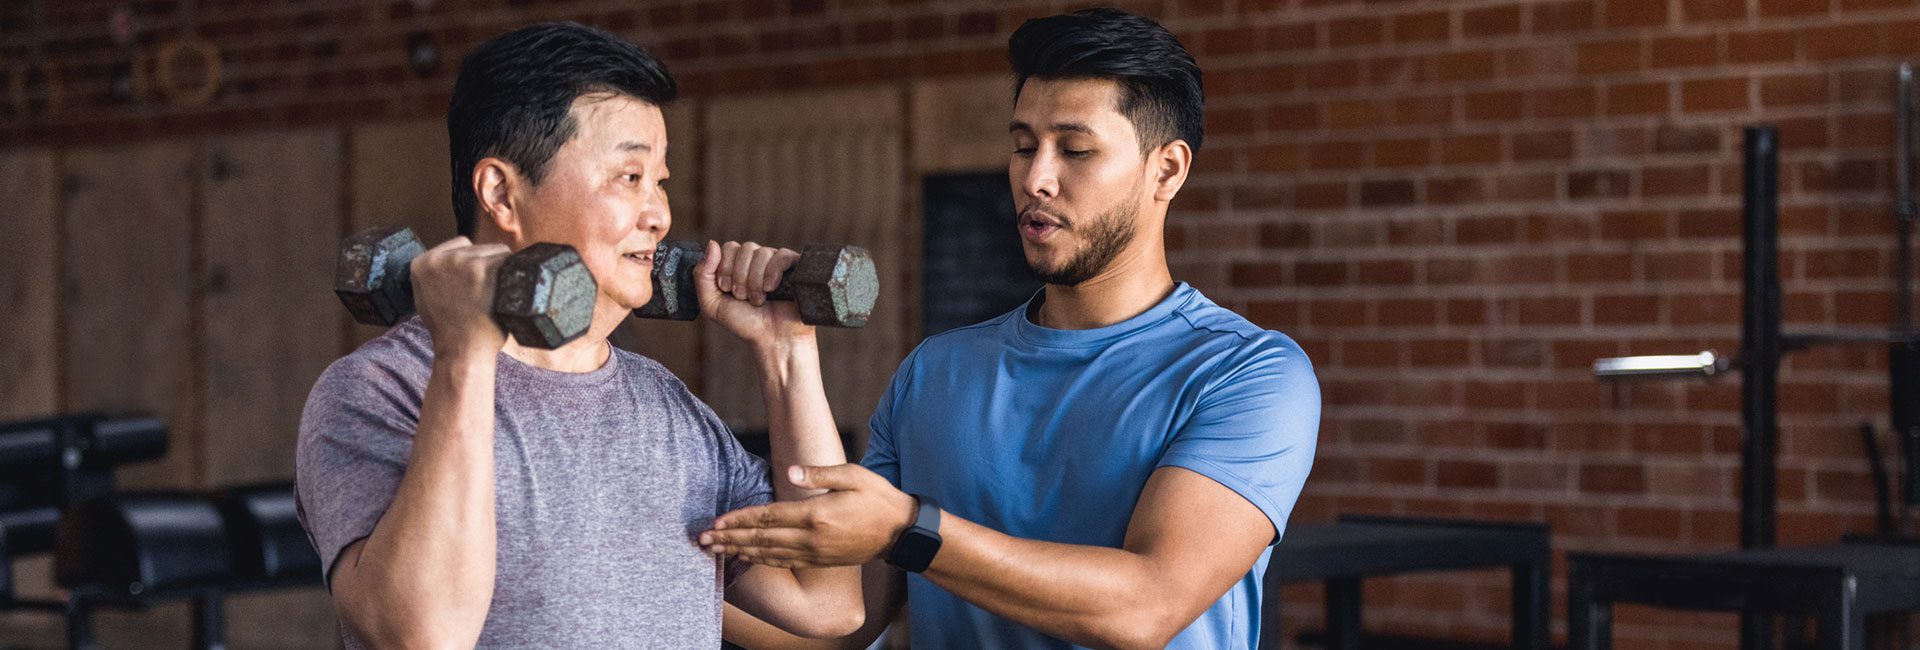 personal trainer healping a gym member workout